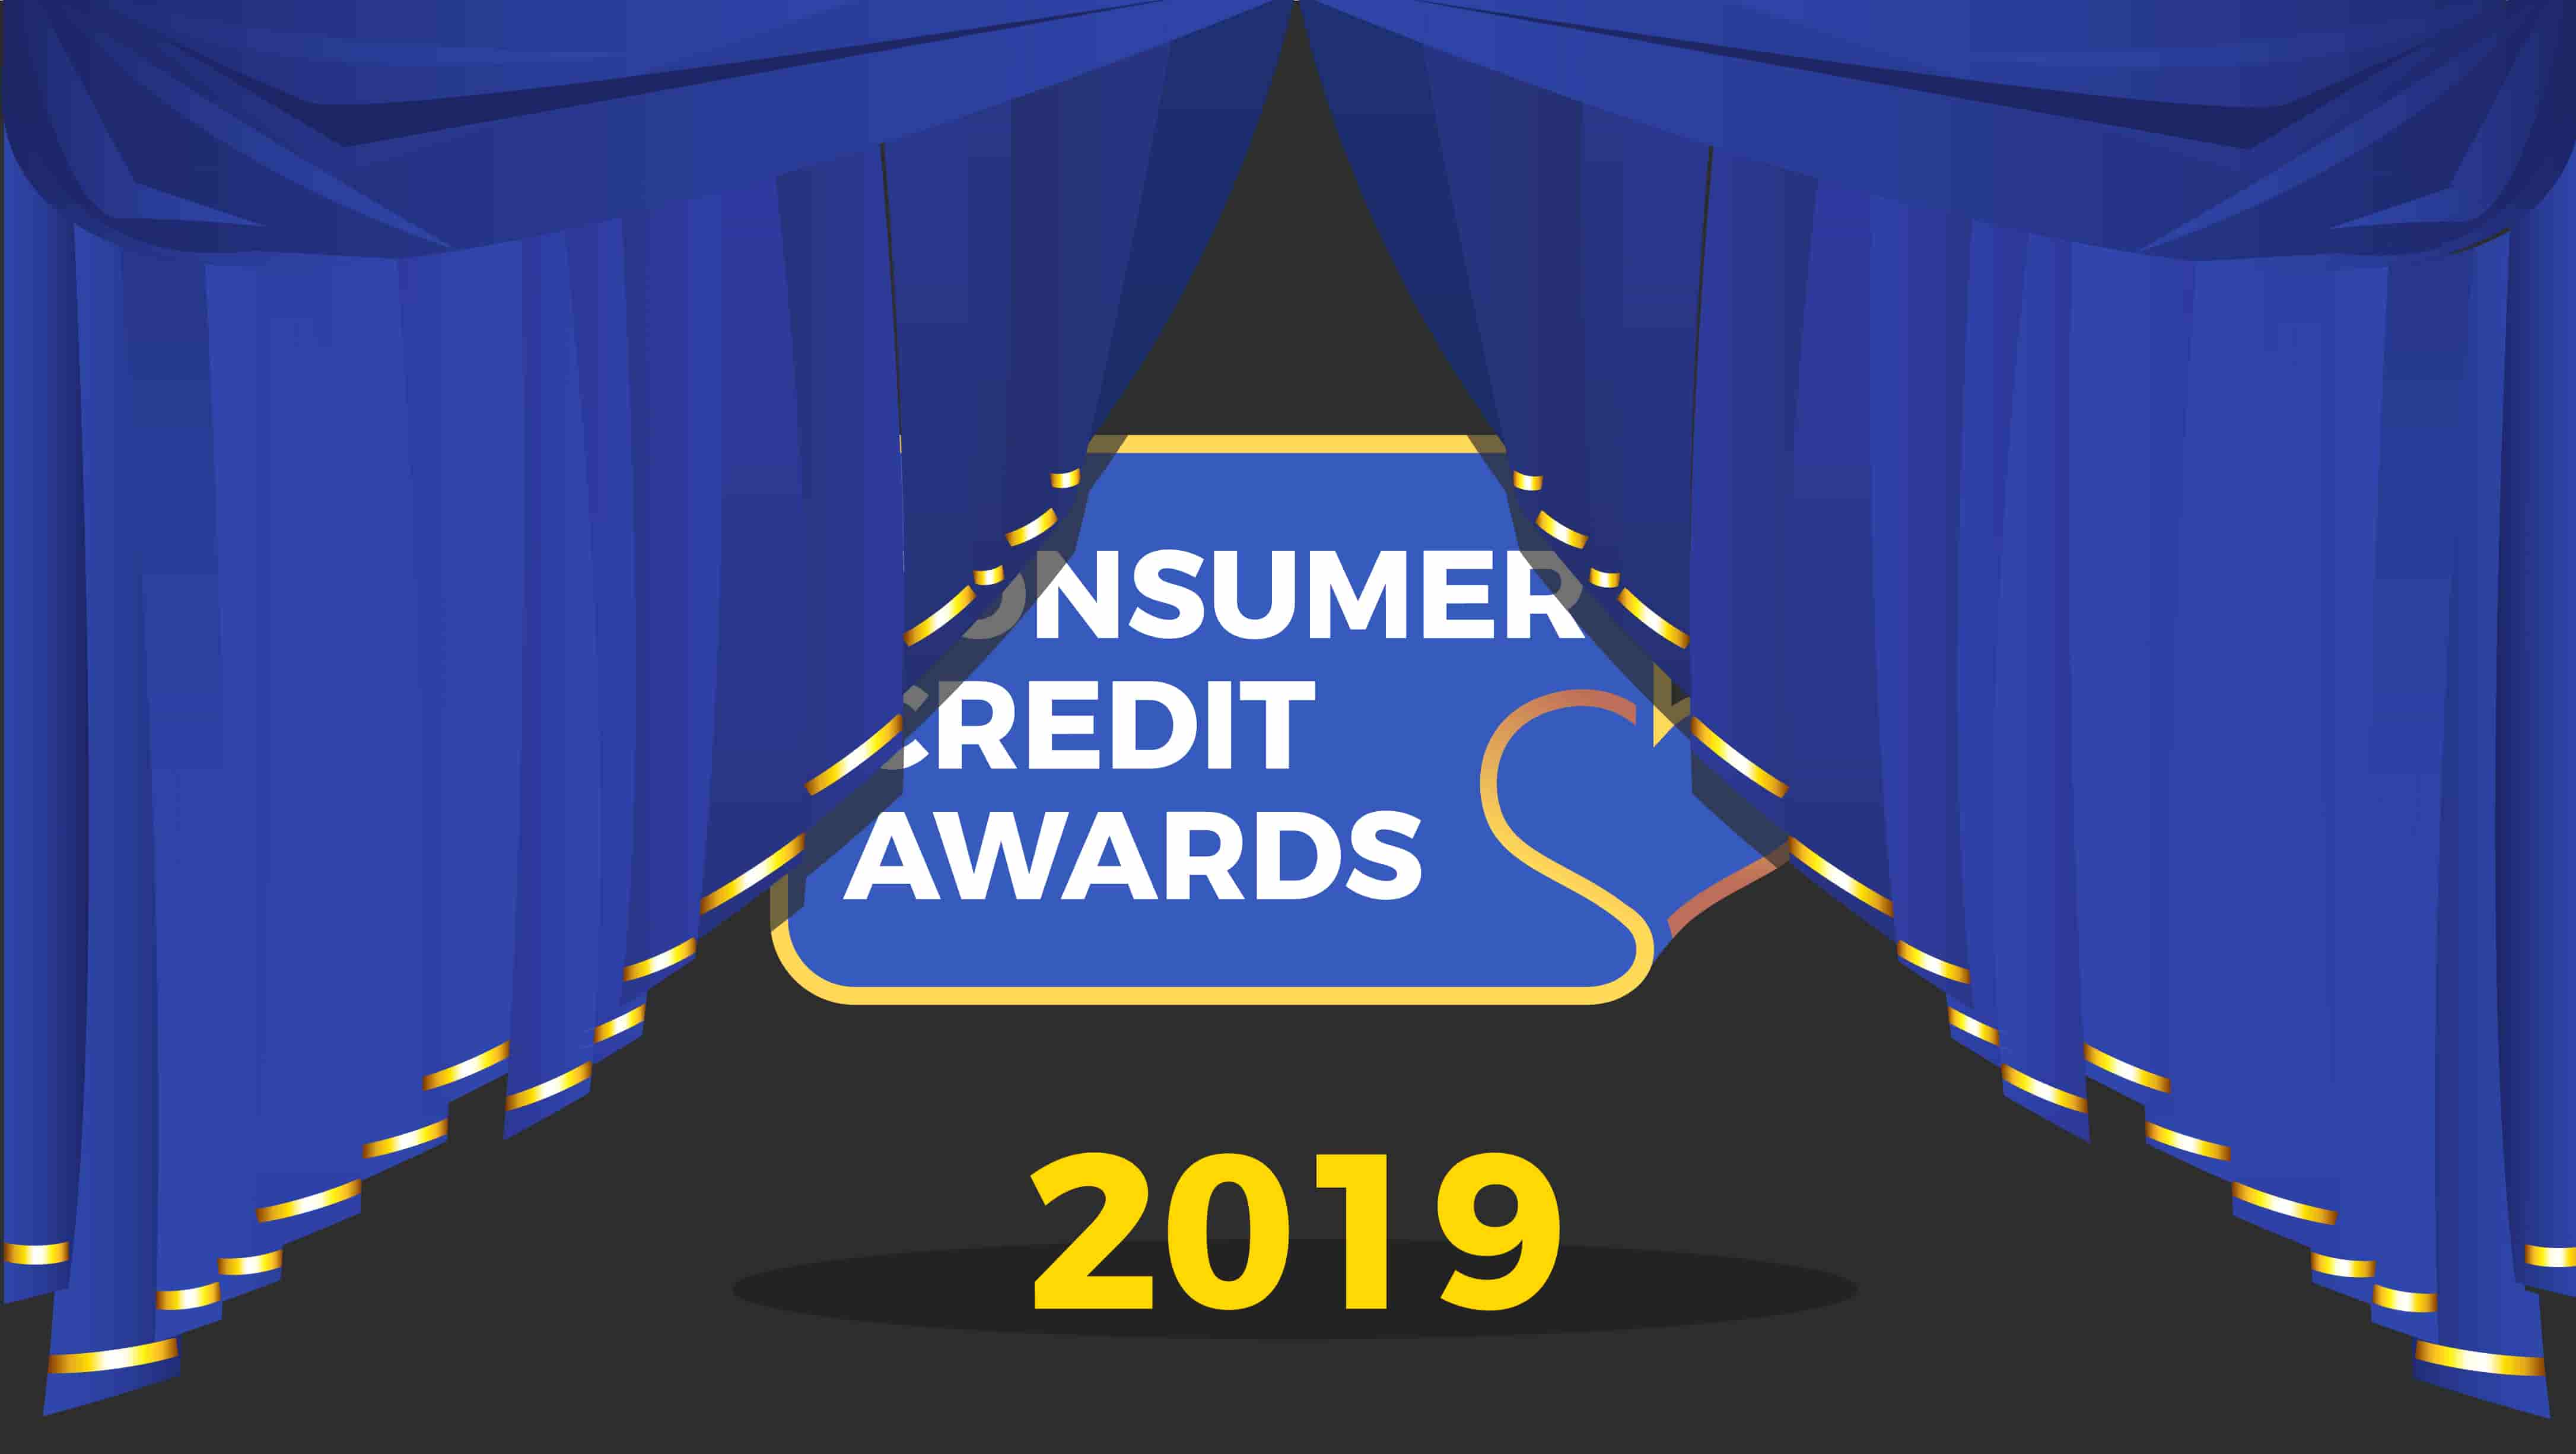 Voting in the Consumer Credit Awards 2019 is open